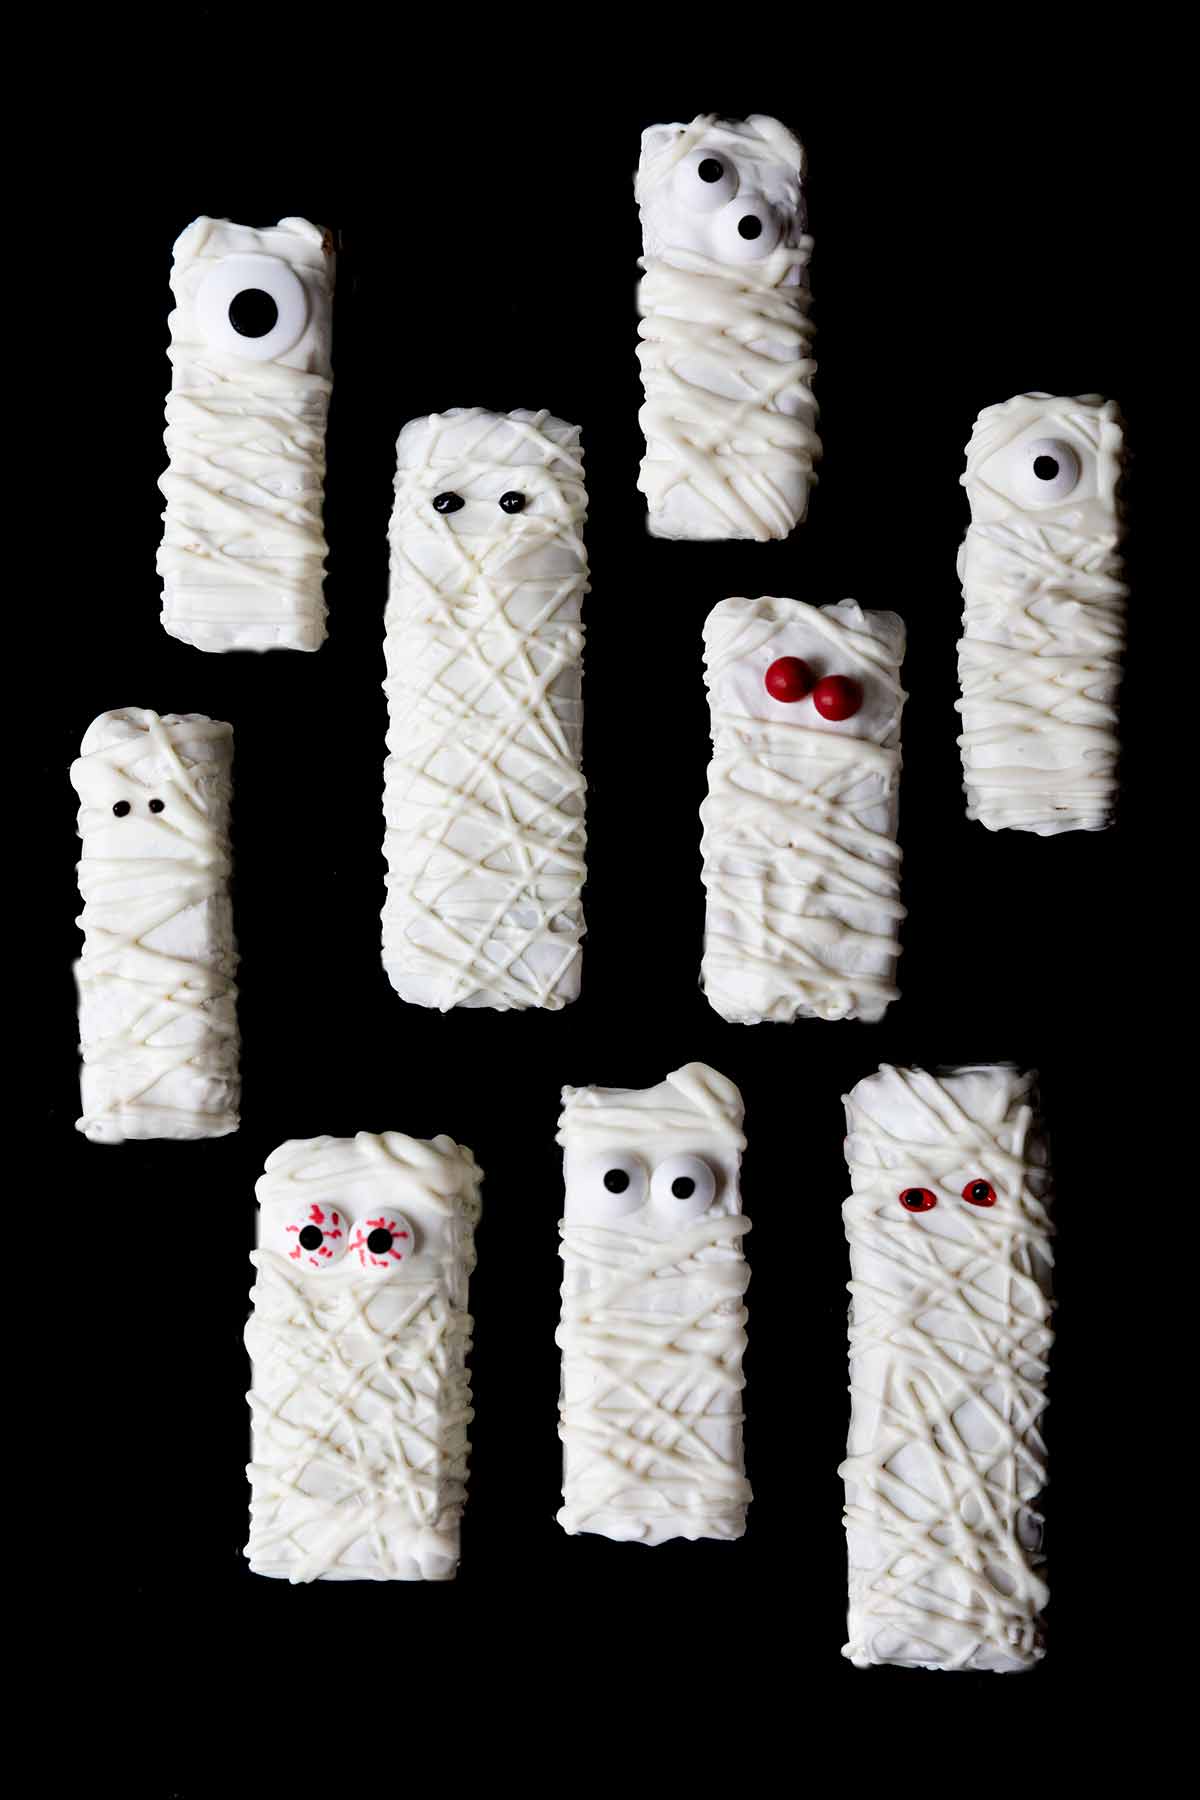 a ghoulish group of Halloween mummy treats